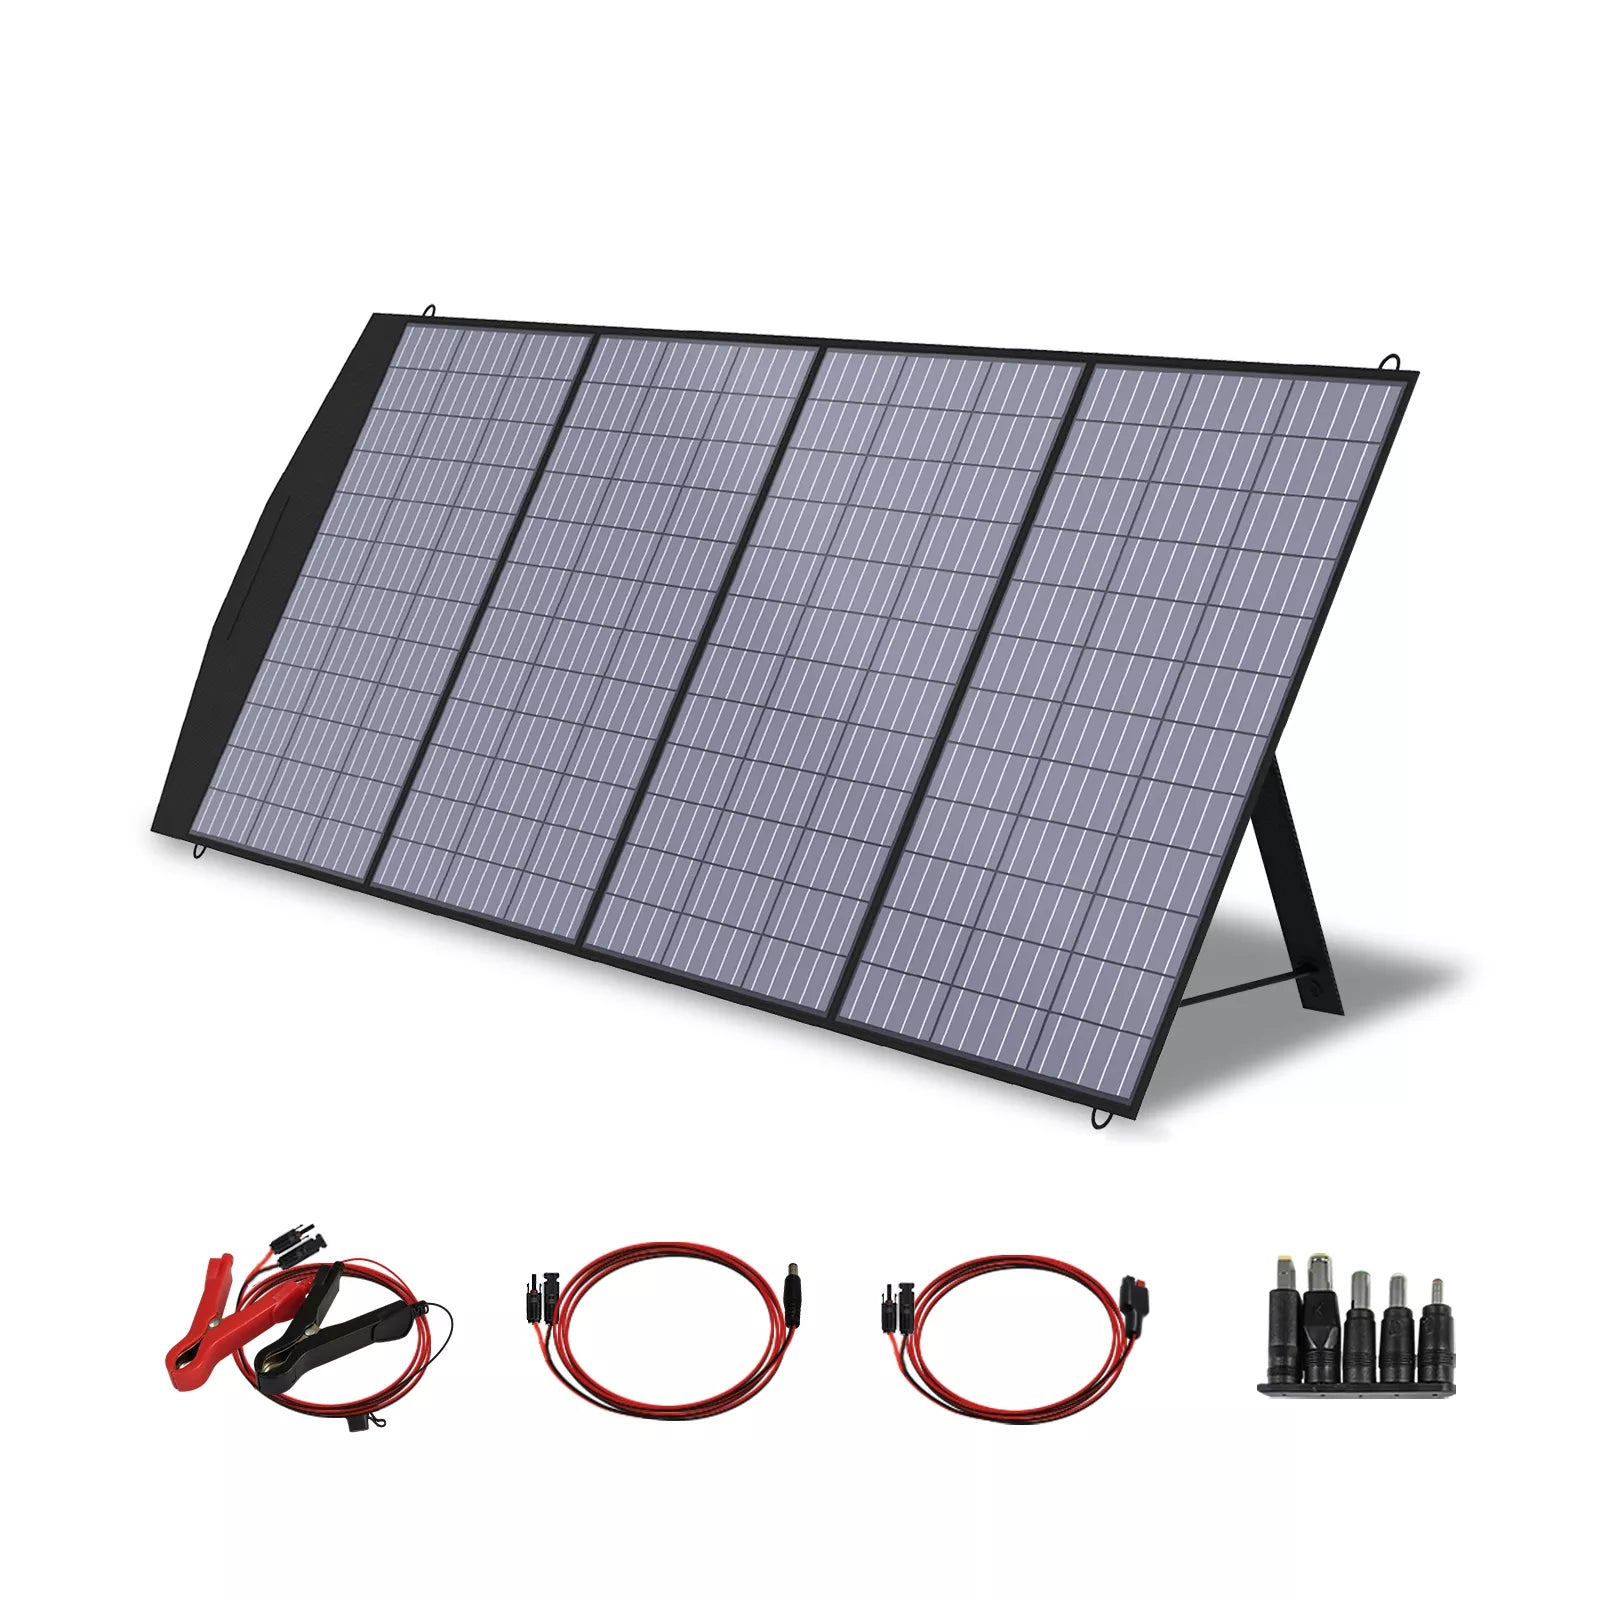 ALLPOWERS 18V Foldable Solar Panel, Rugged solar panel with water-resistant design and adjustable bracket for safe and reliable energy harvesting.